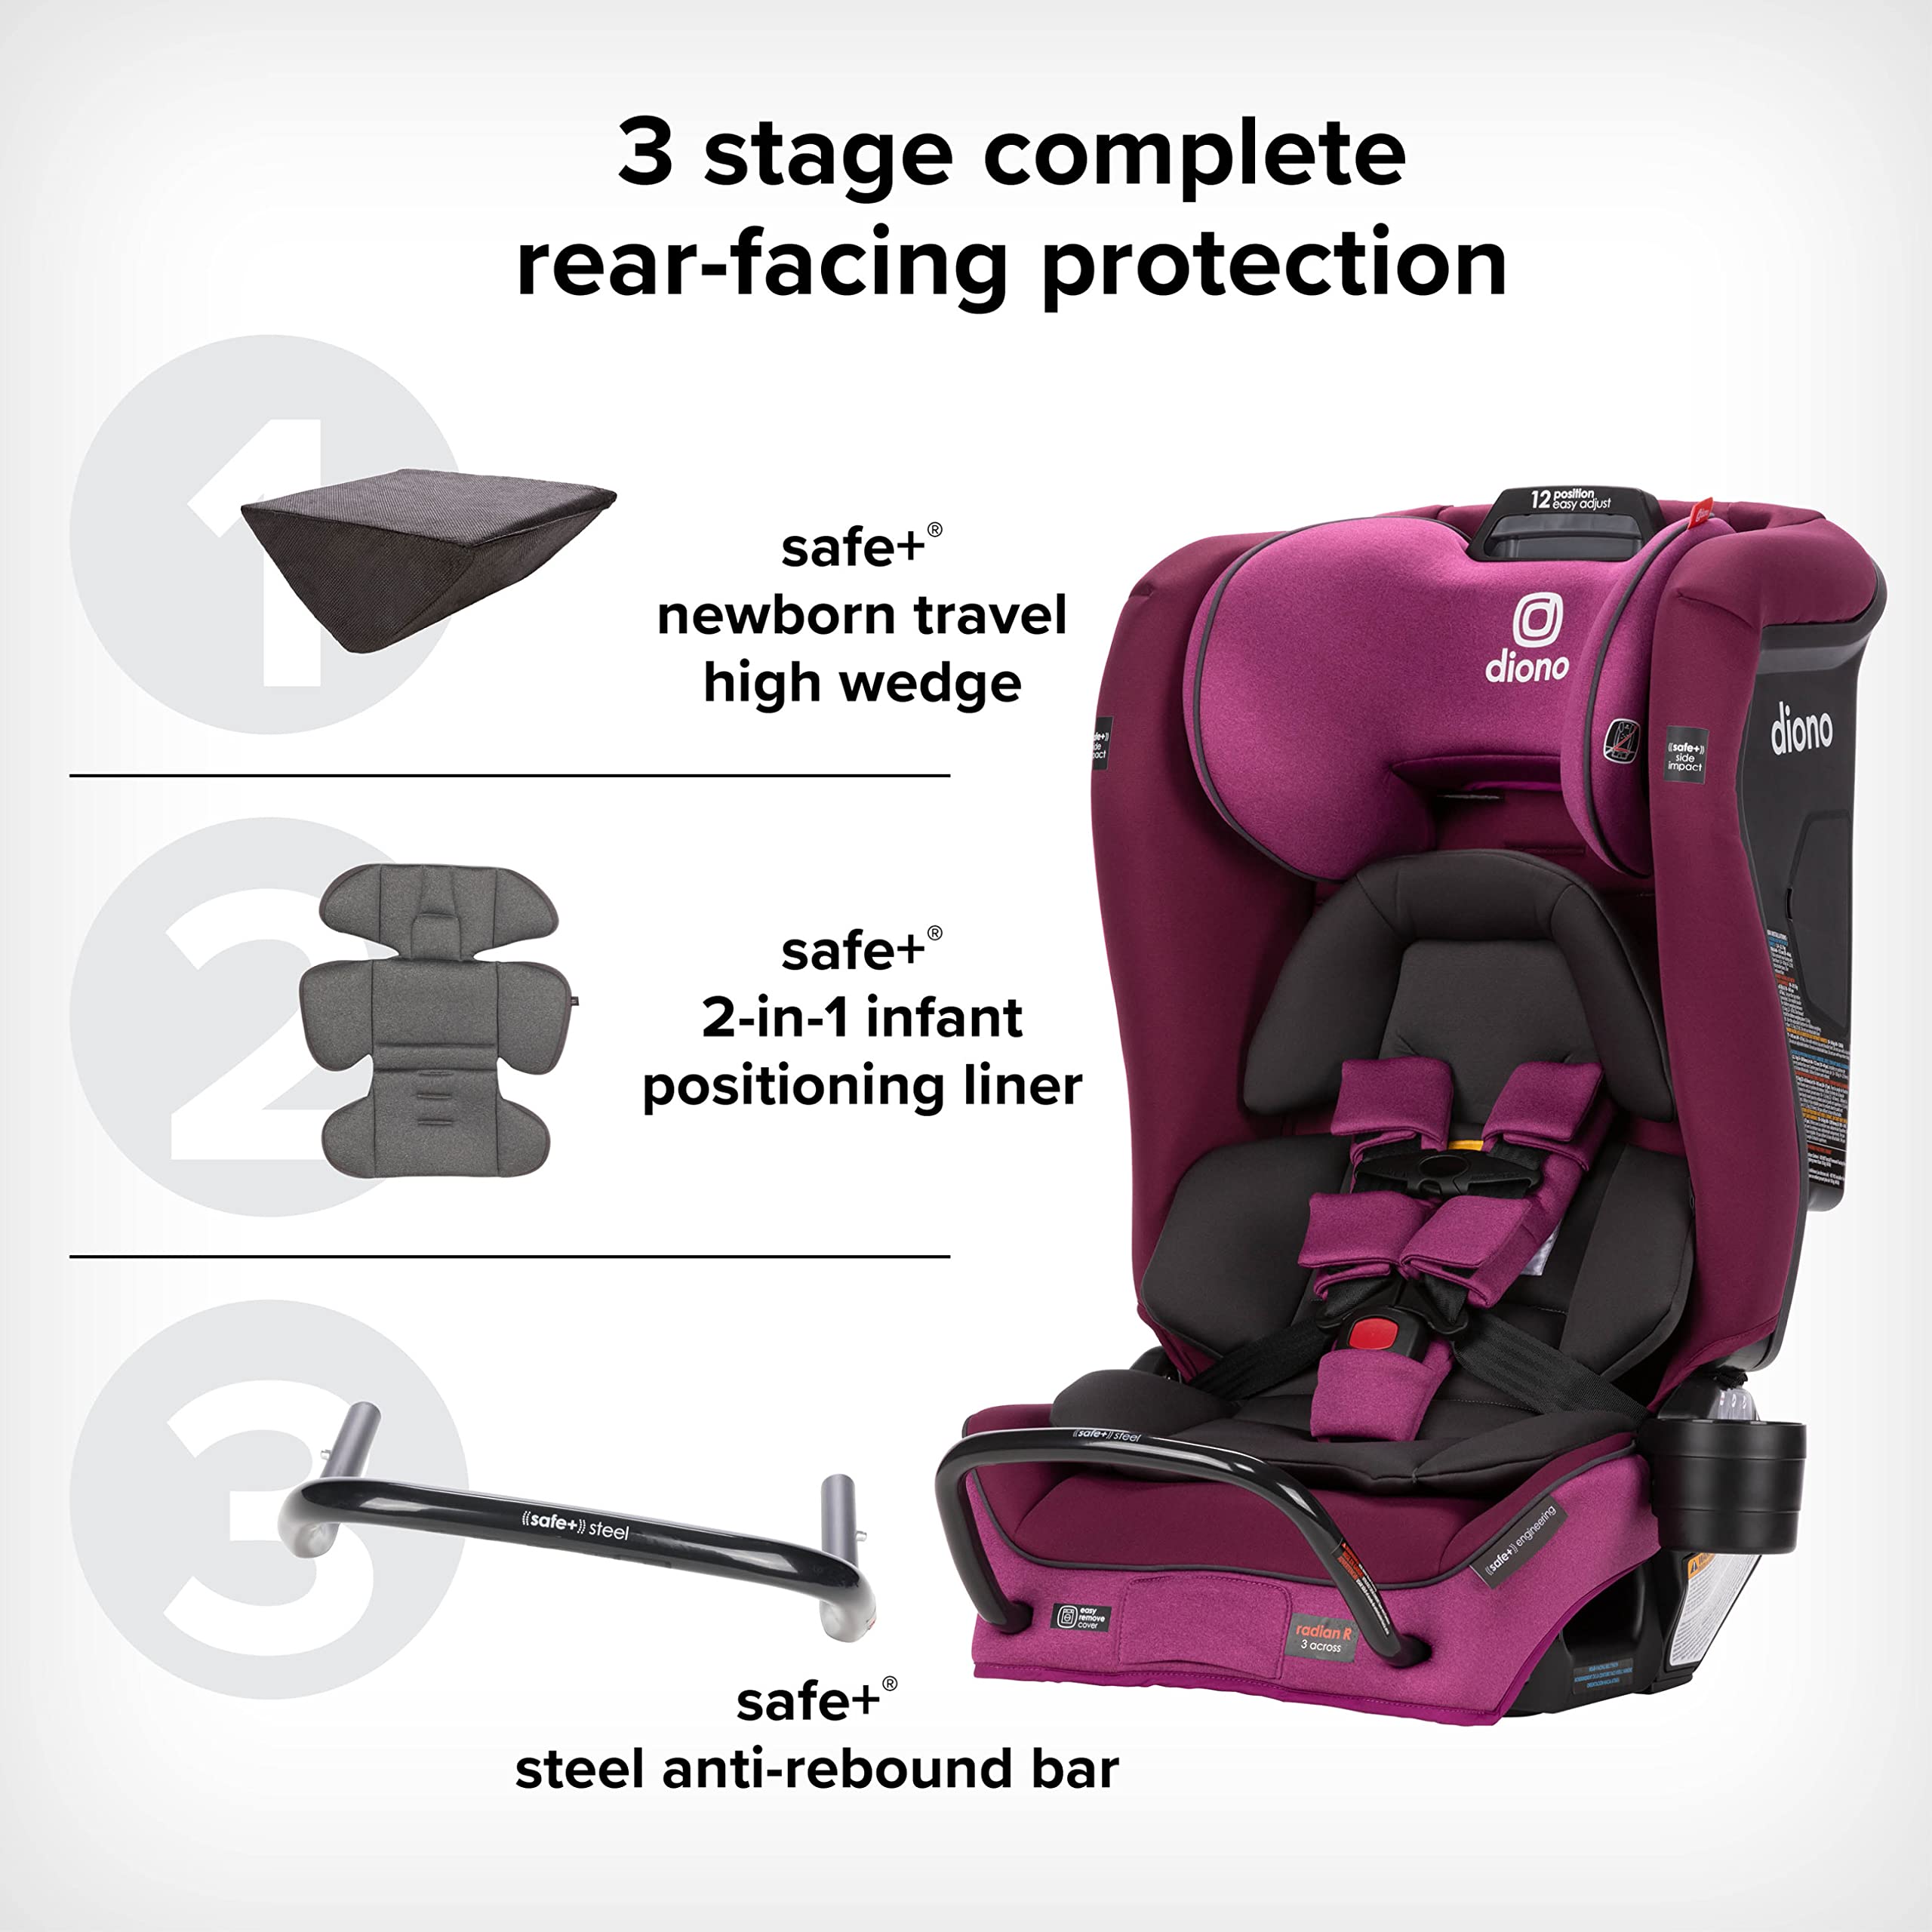 Diono Radian 3RXT SafePlus, 4-in-1 Convertible Car Seat, Rear and Forward Facing, SafePlus Engineering, 3 Stage -Infant Protection, 10 Years 1 Car Seat, Slim Fit 3 Across, Purple Plum